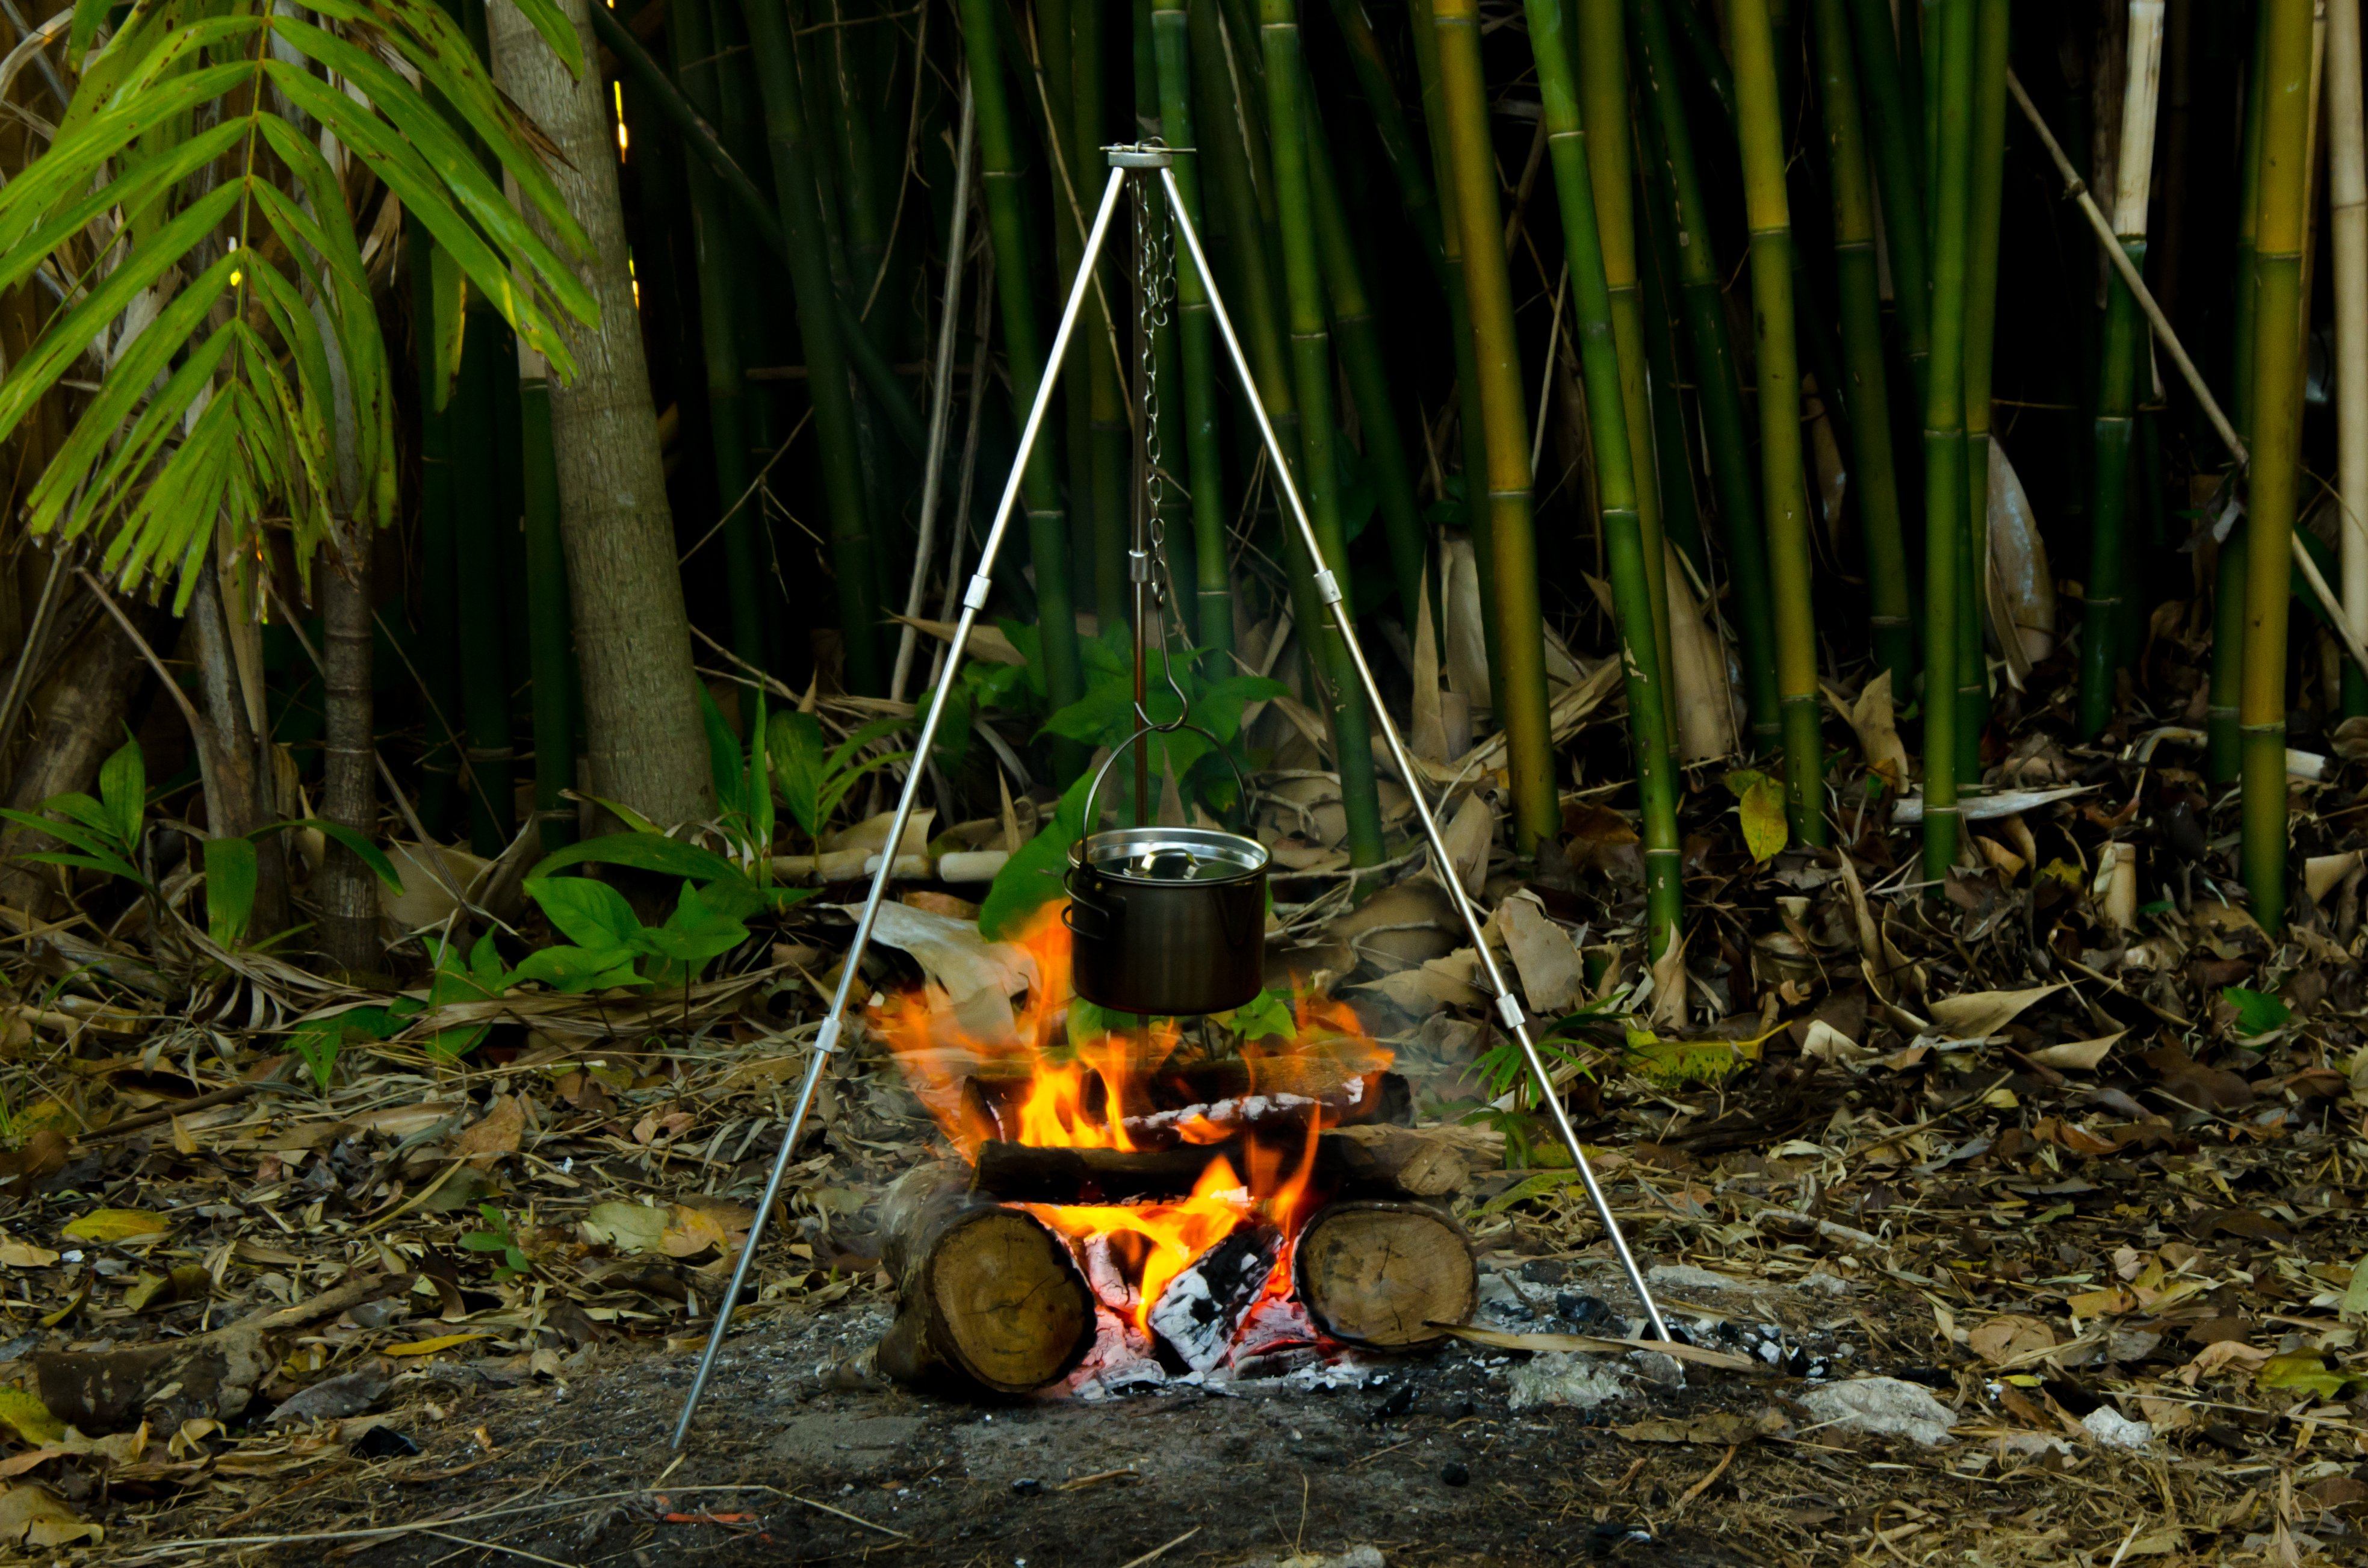 Campfire Grill Tripod Hanging Pot Camping Holder Cooking Hanging